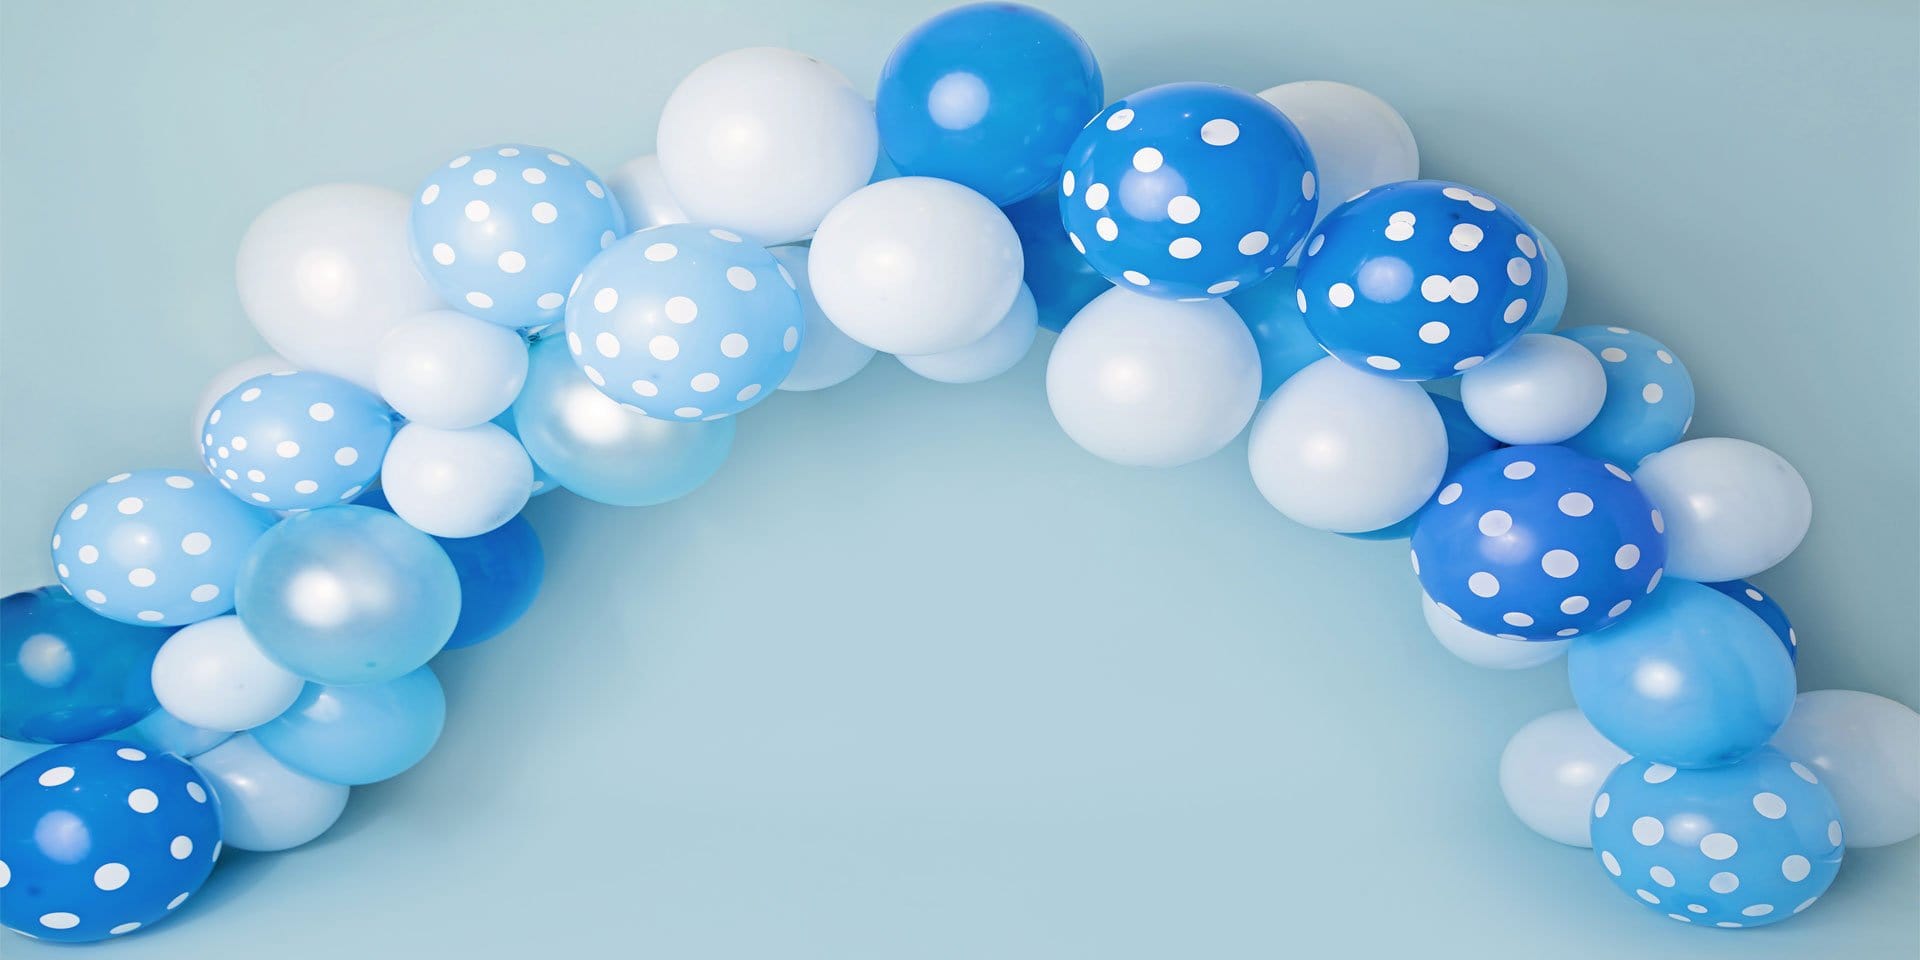 Kate Blue and White Balloons Birthday Children Backdrop for Photography Designed by Kerry Anderson - Kate Backdrop